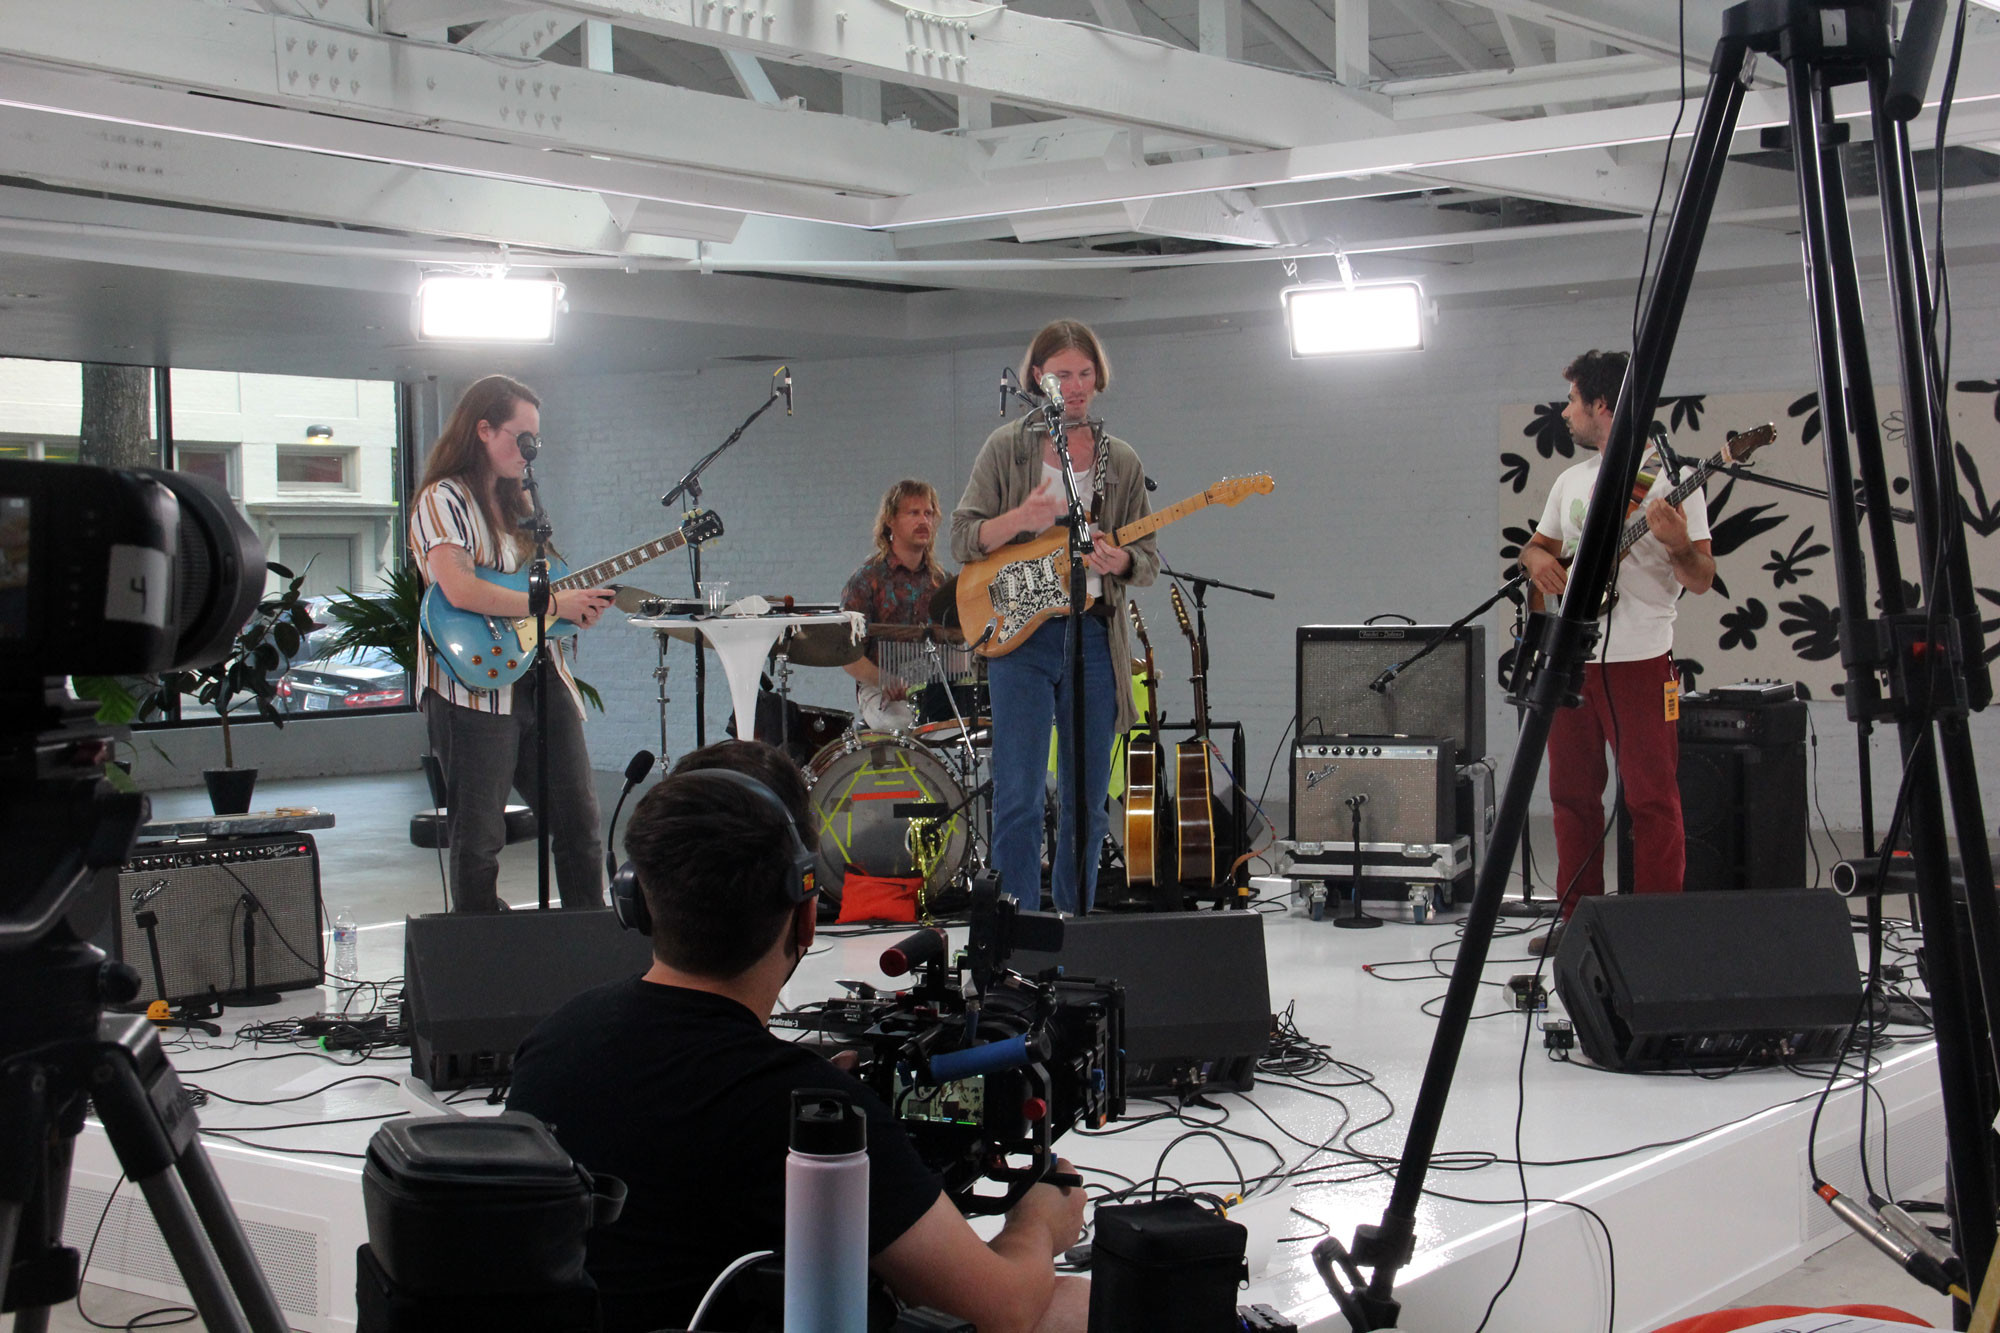 The band performing for the video shoot